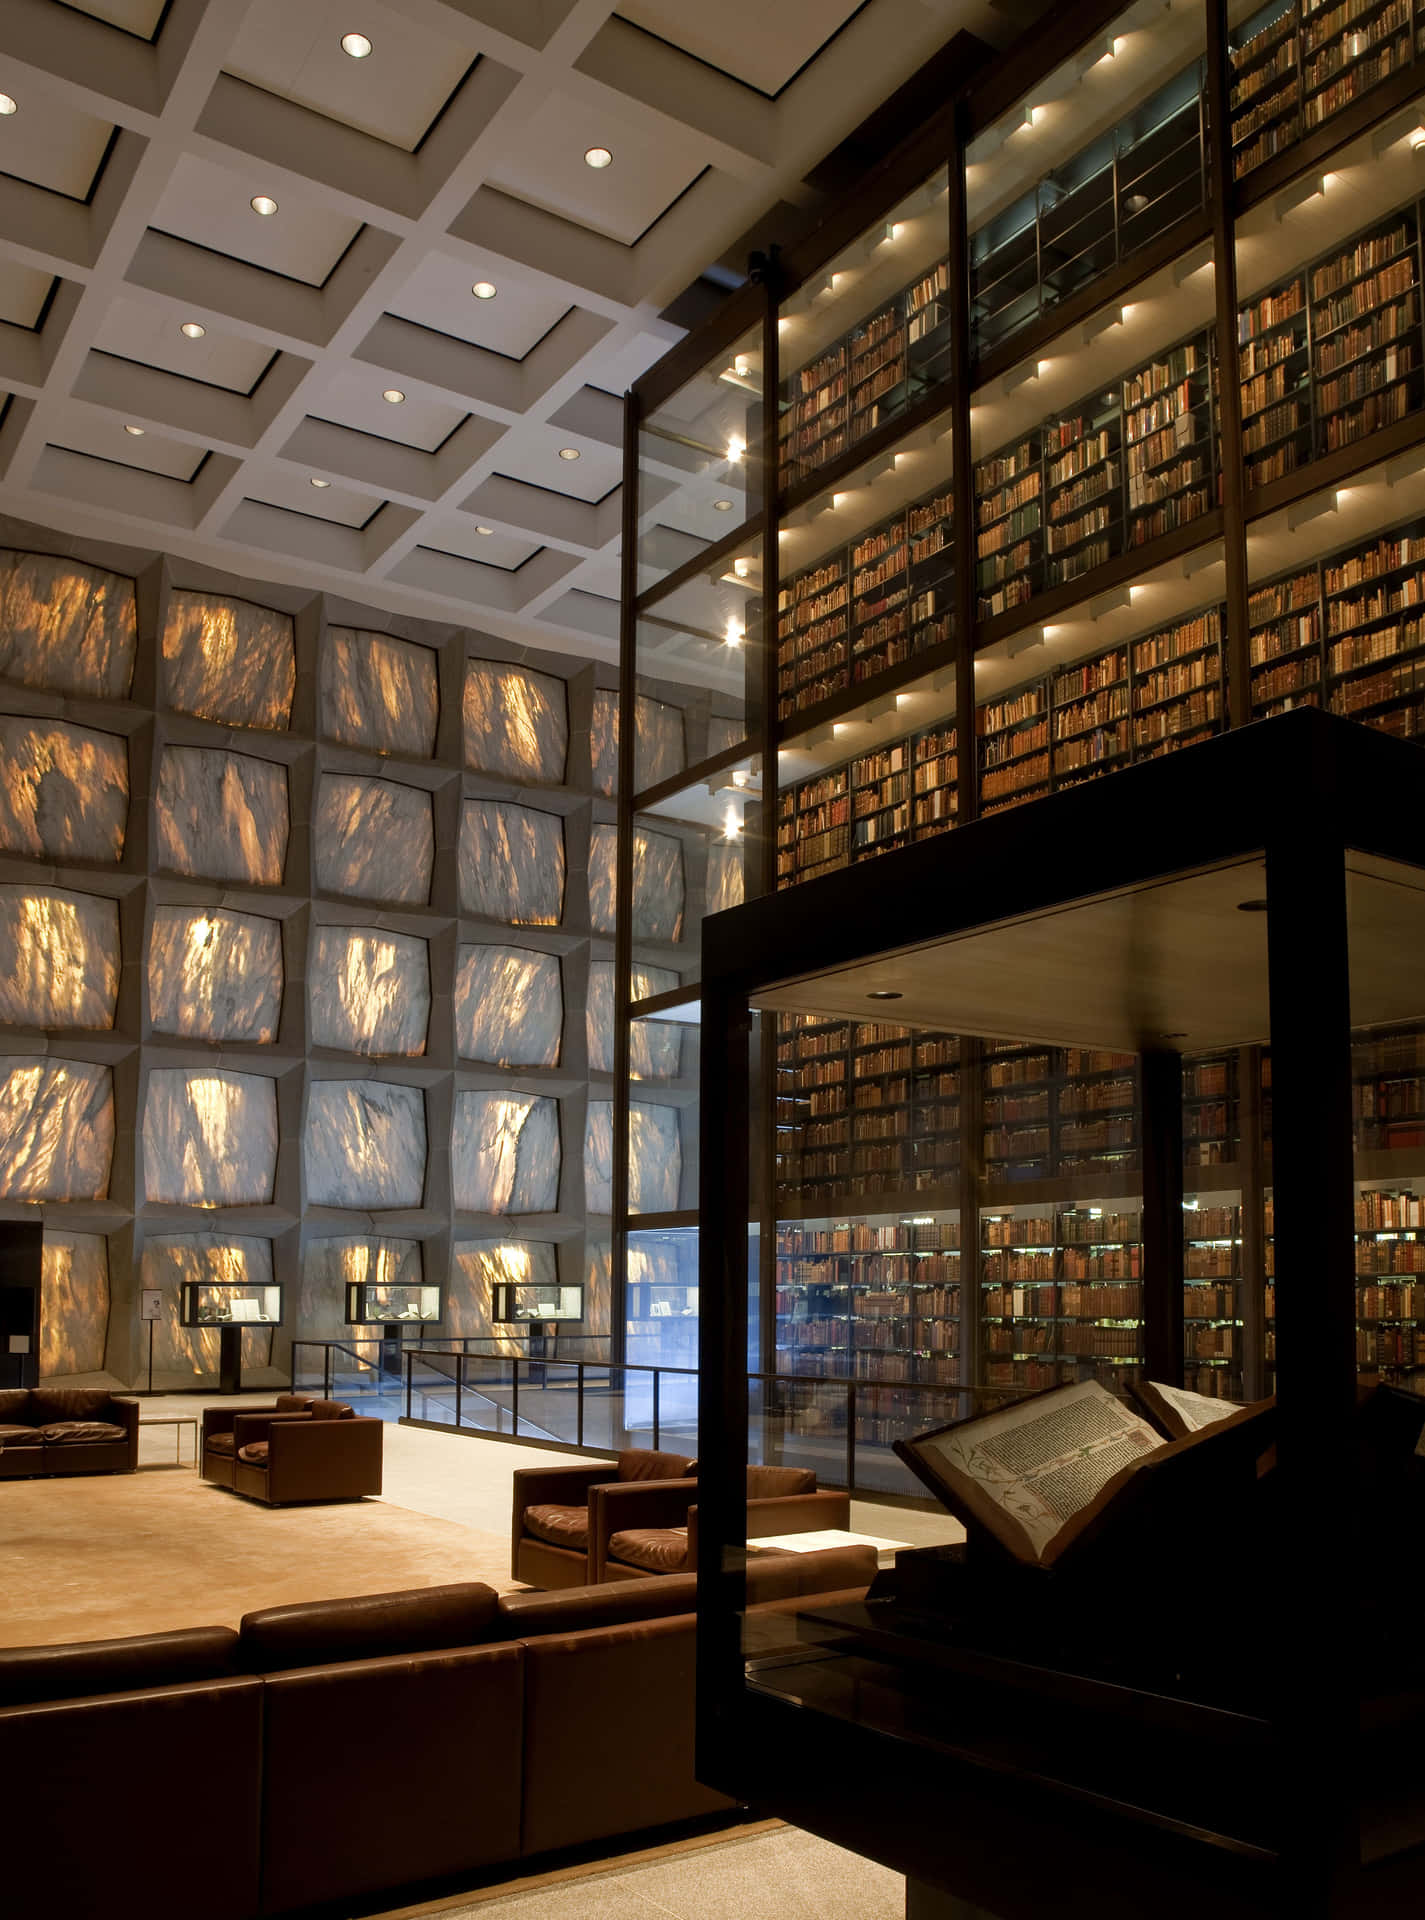 Evocative Image of a Classic Library